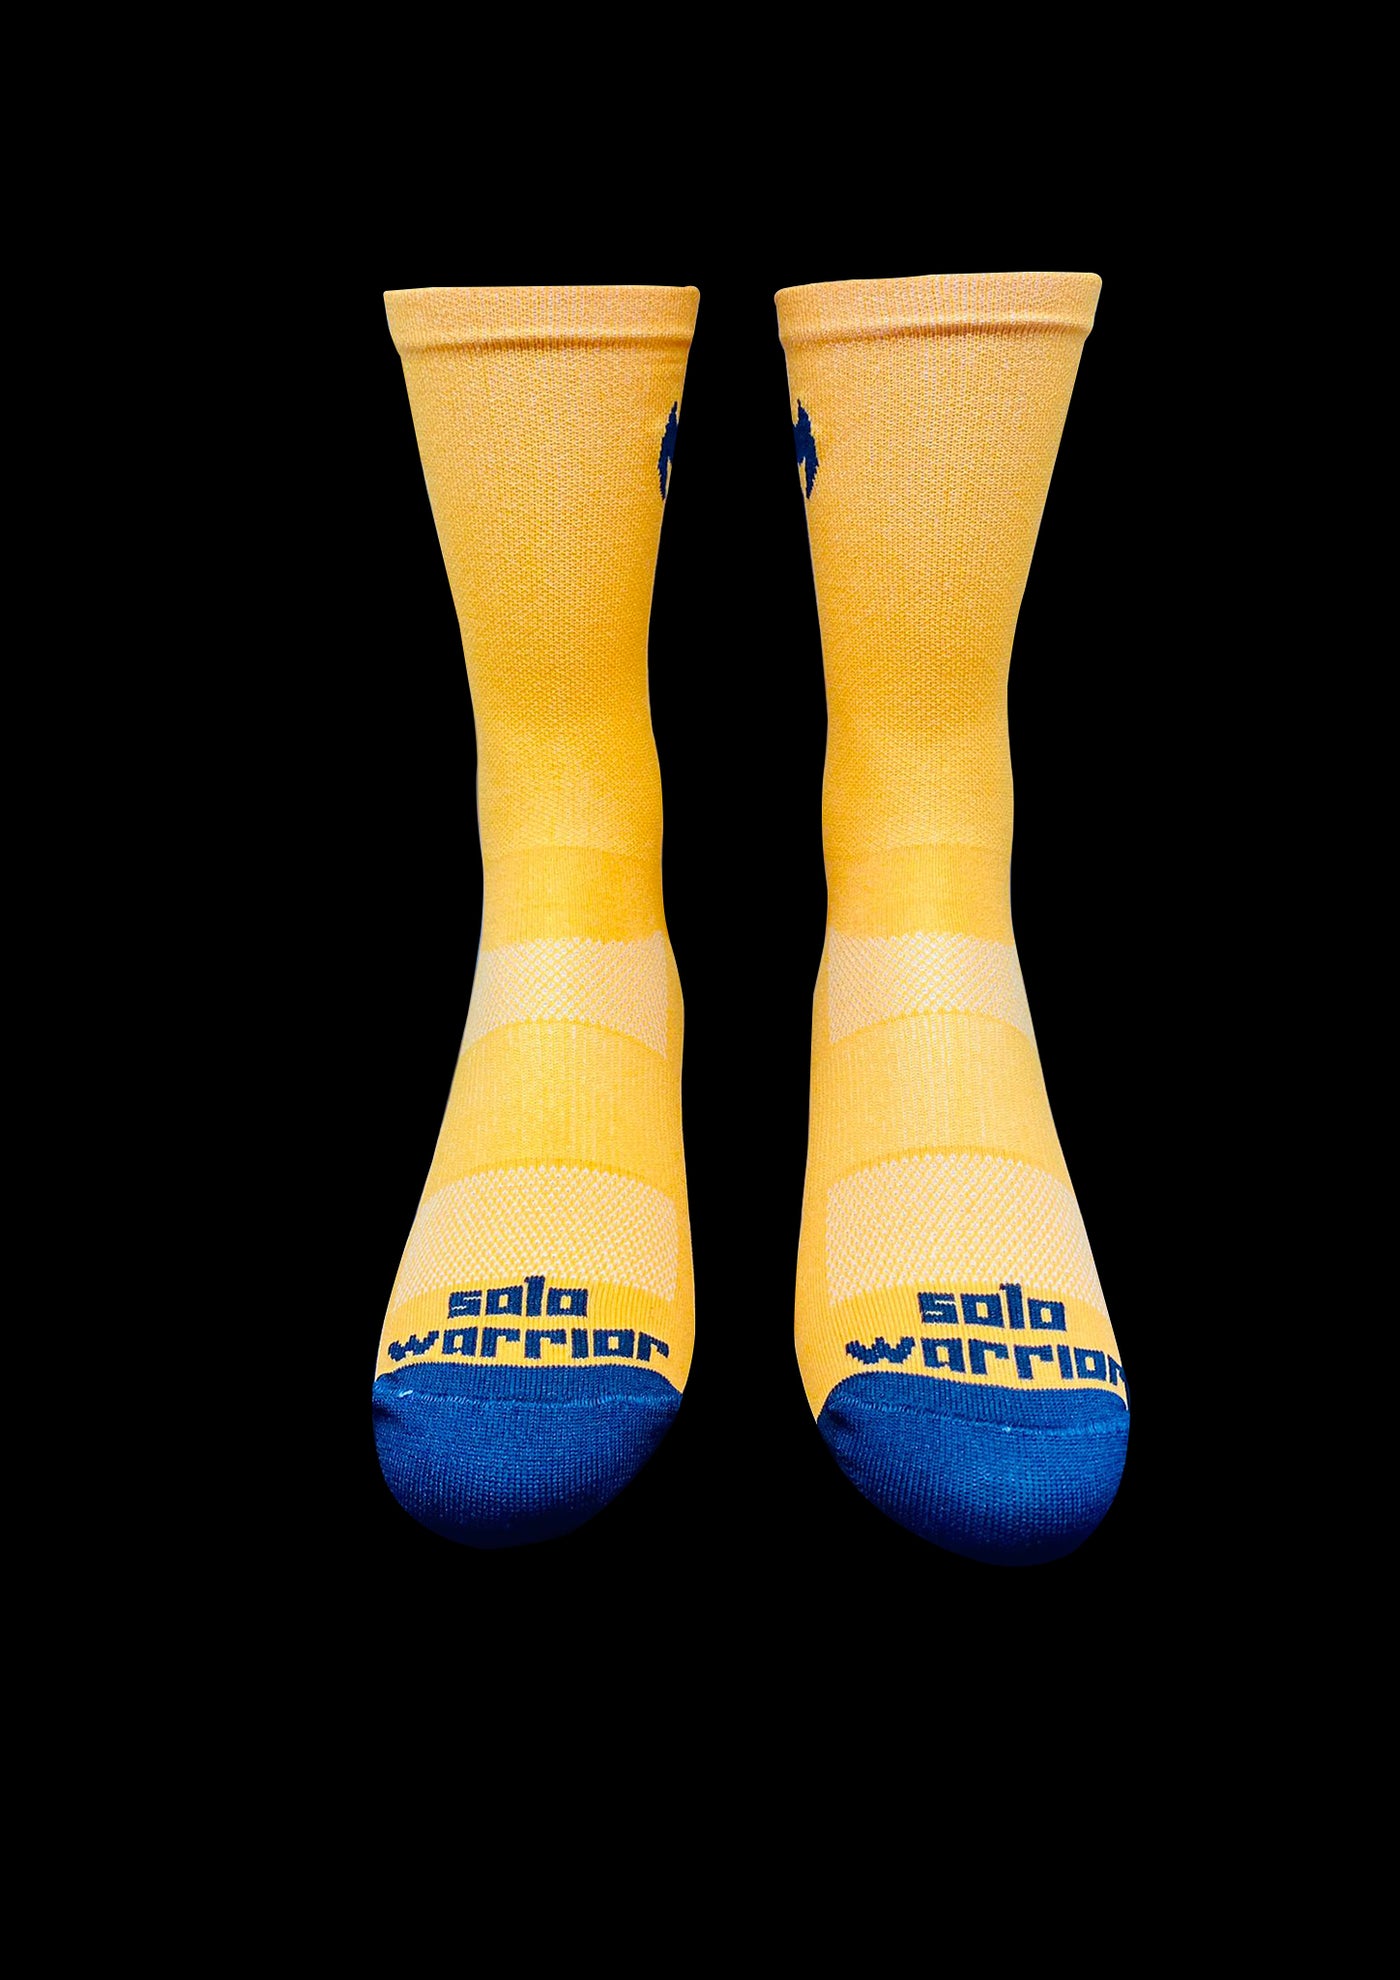 6” Solid Orange / black  2.0 Men’s and Women’s compression cycling socks.